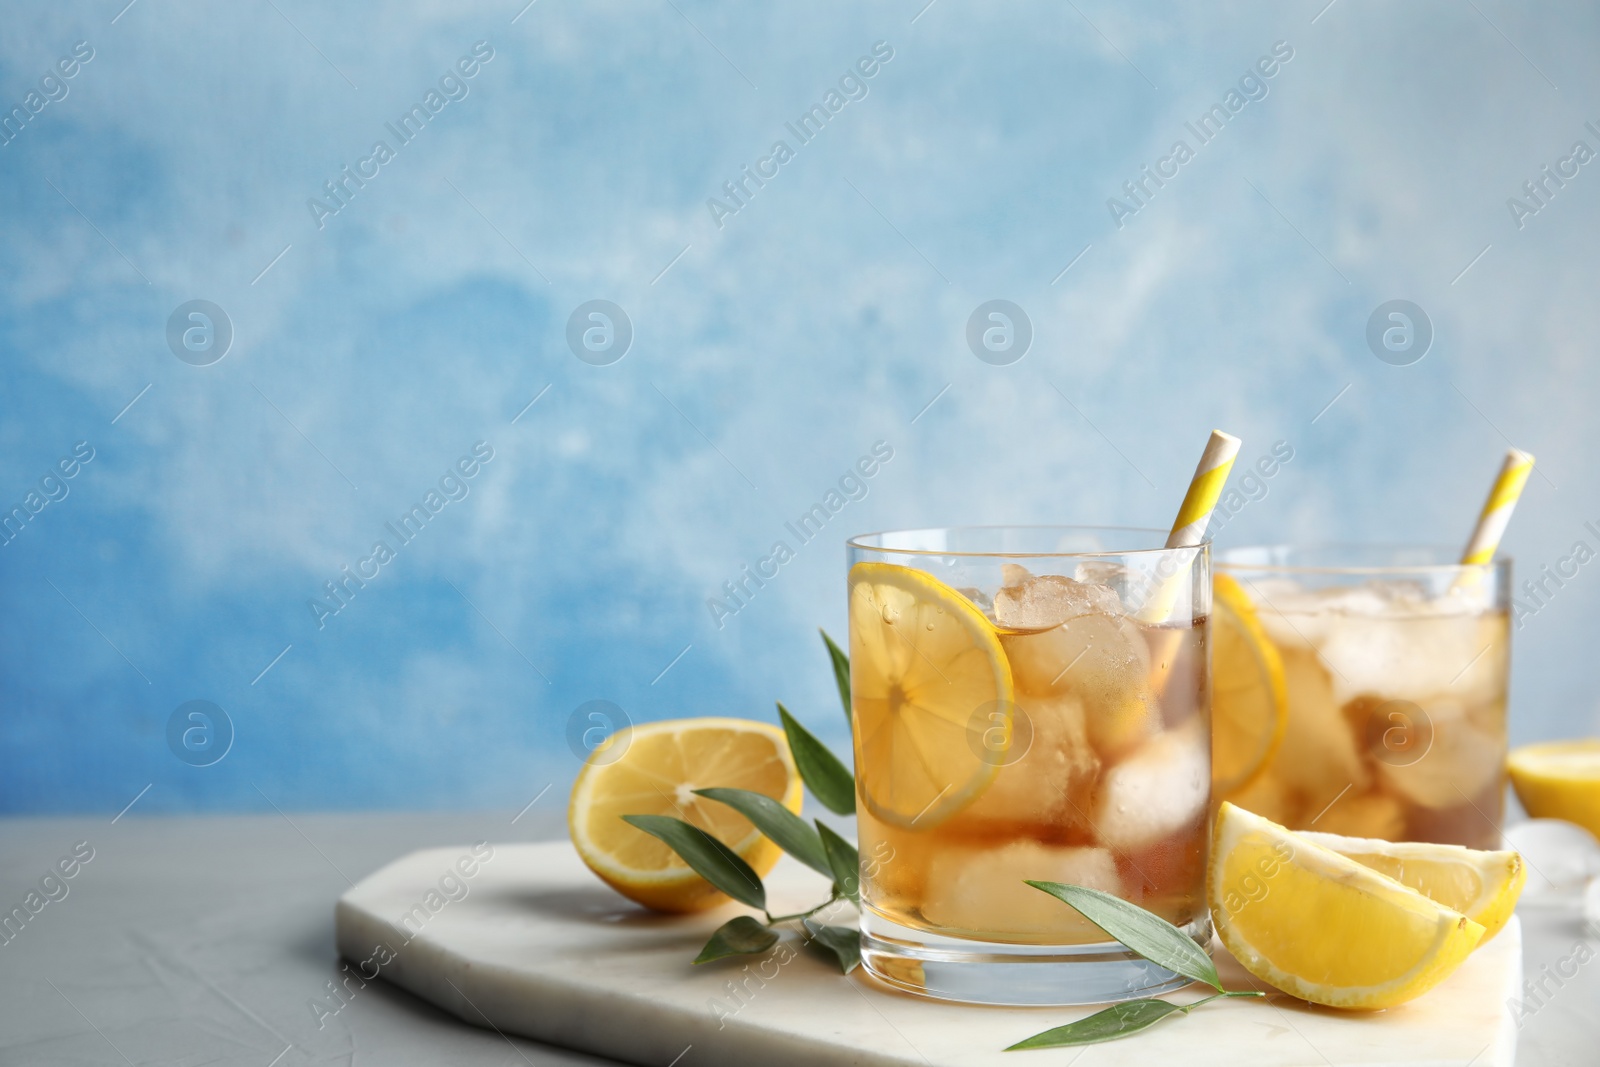 Photo of Glasses of lemonade with ice cubes and fruit on table against color background. Space for text